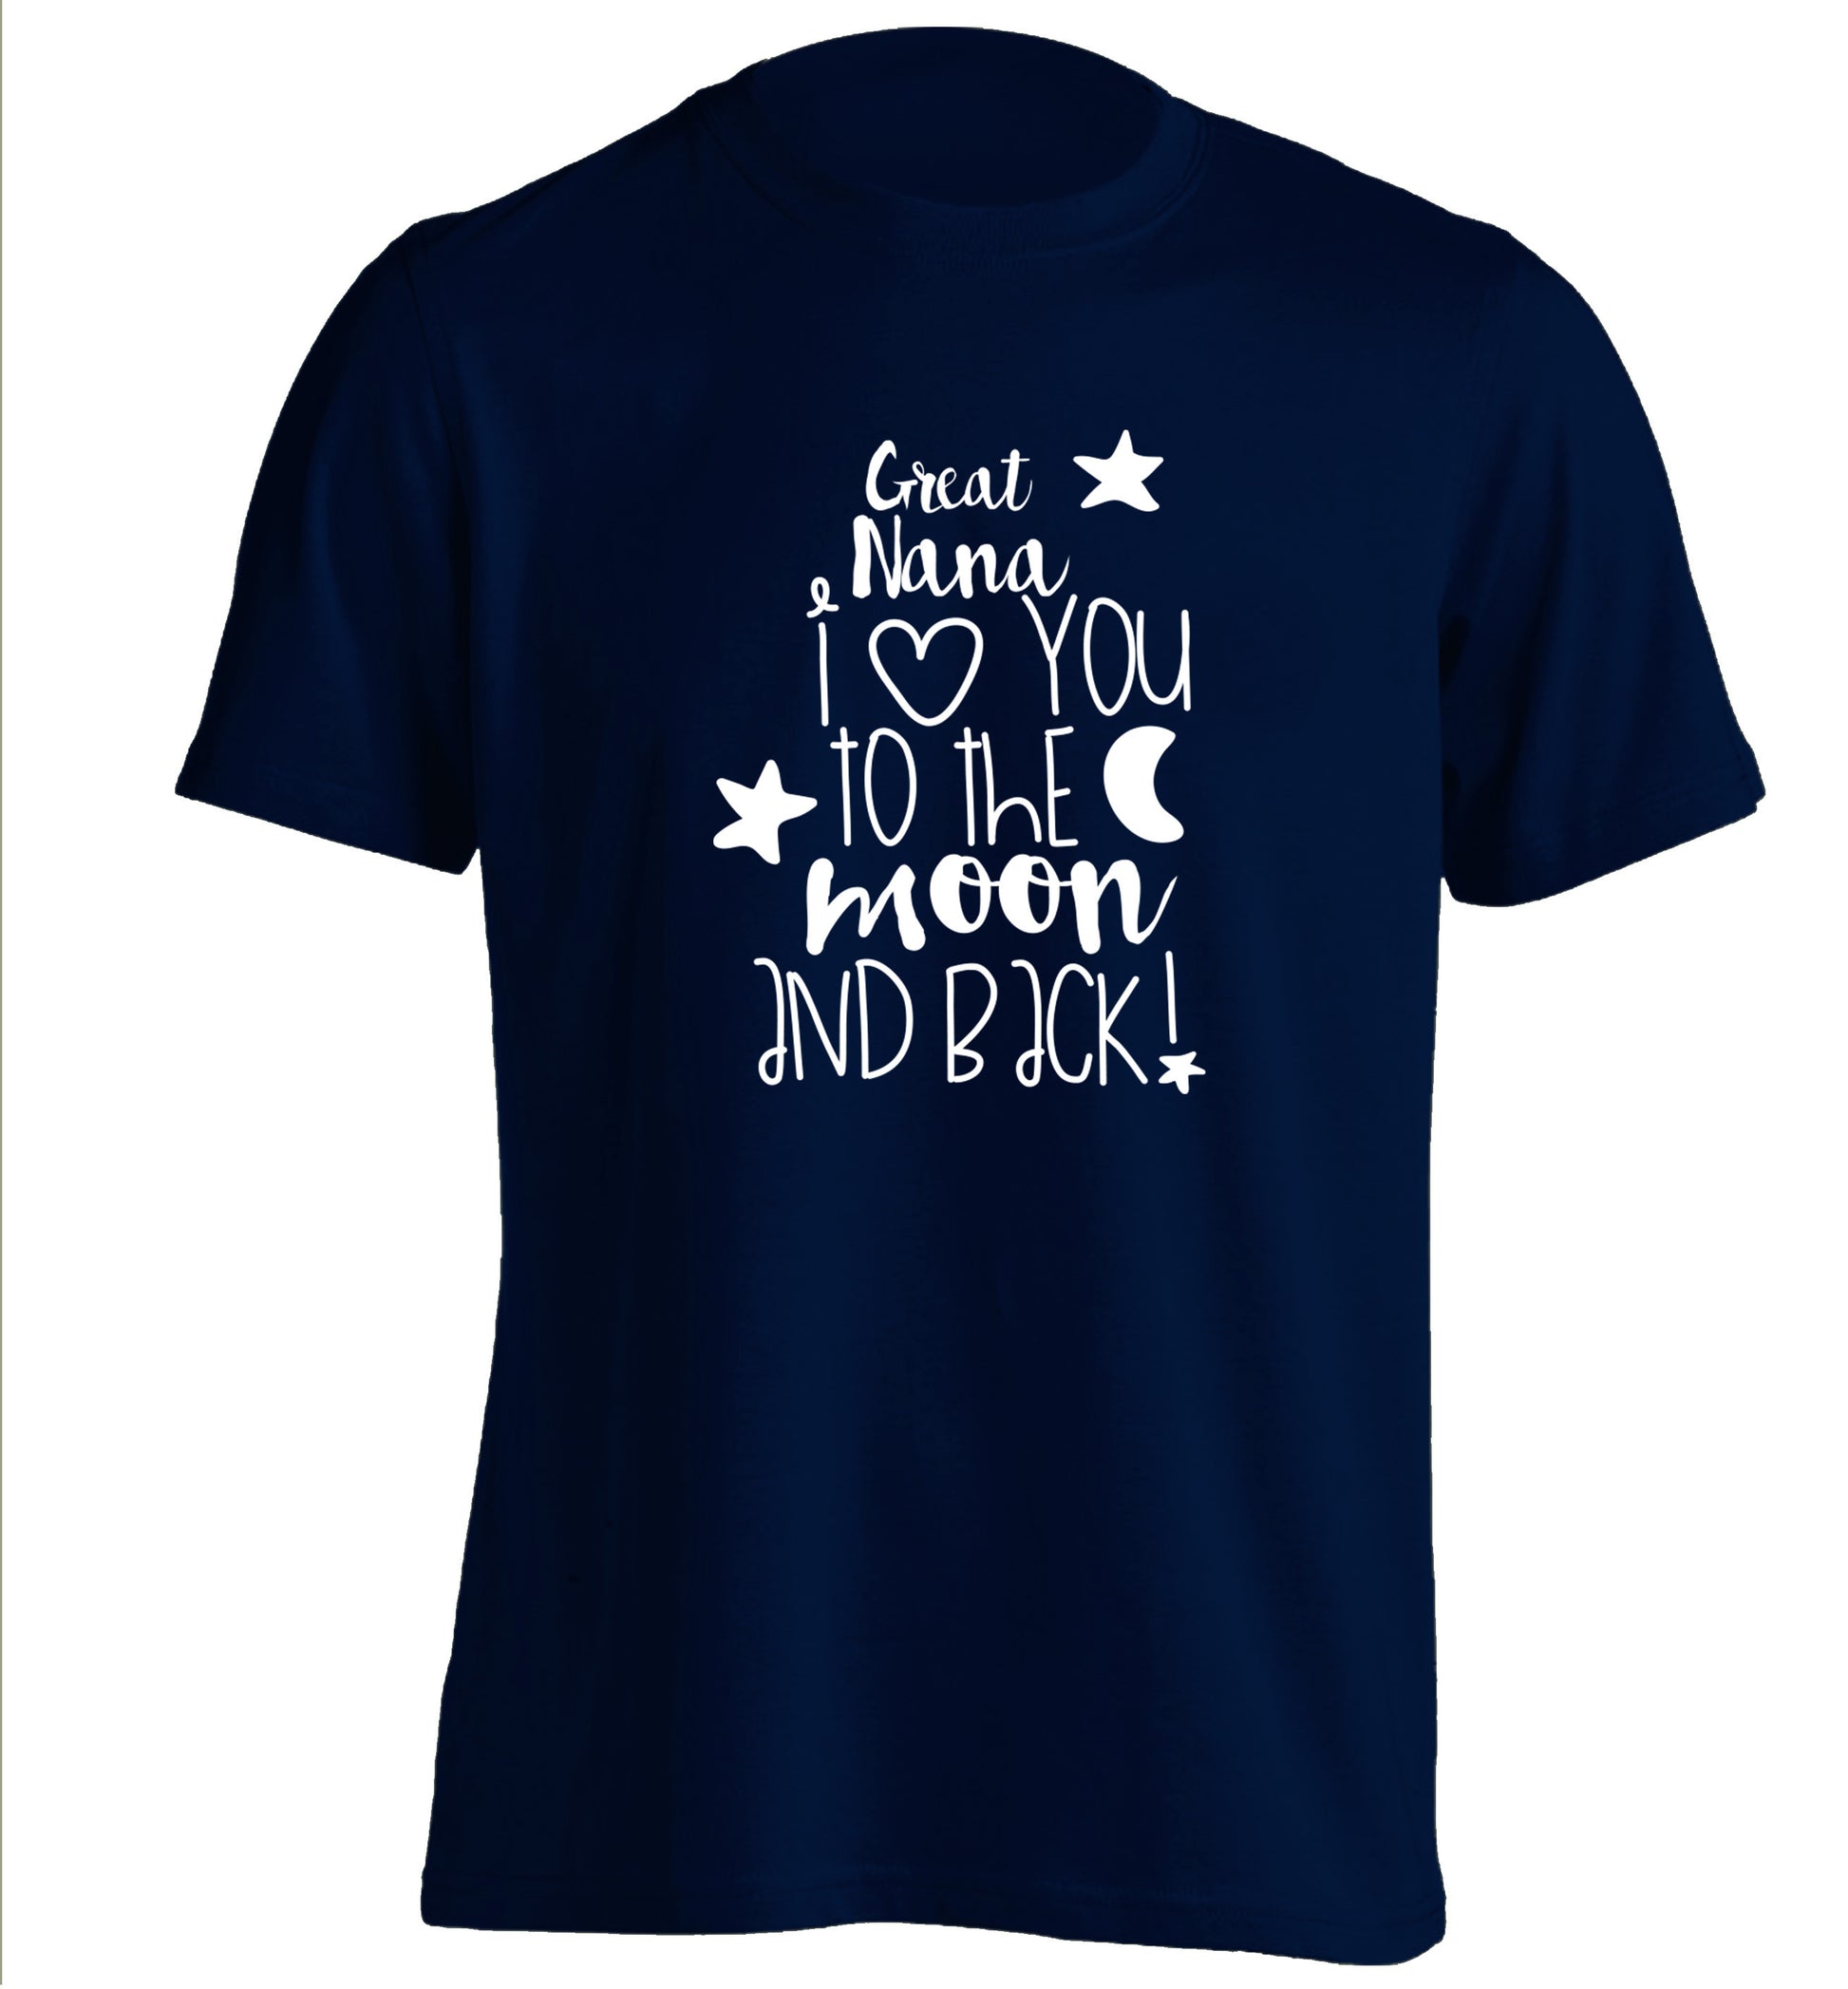 Great Nana I love you to the moon and back adults unisex navy Tshirt 2XL